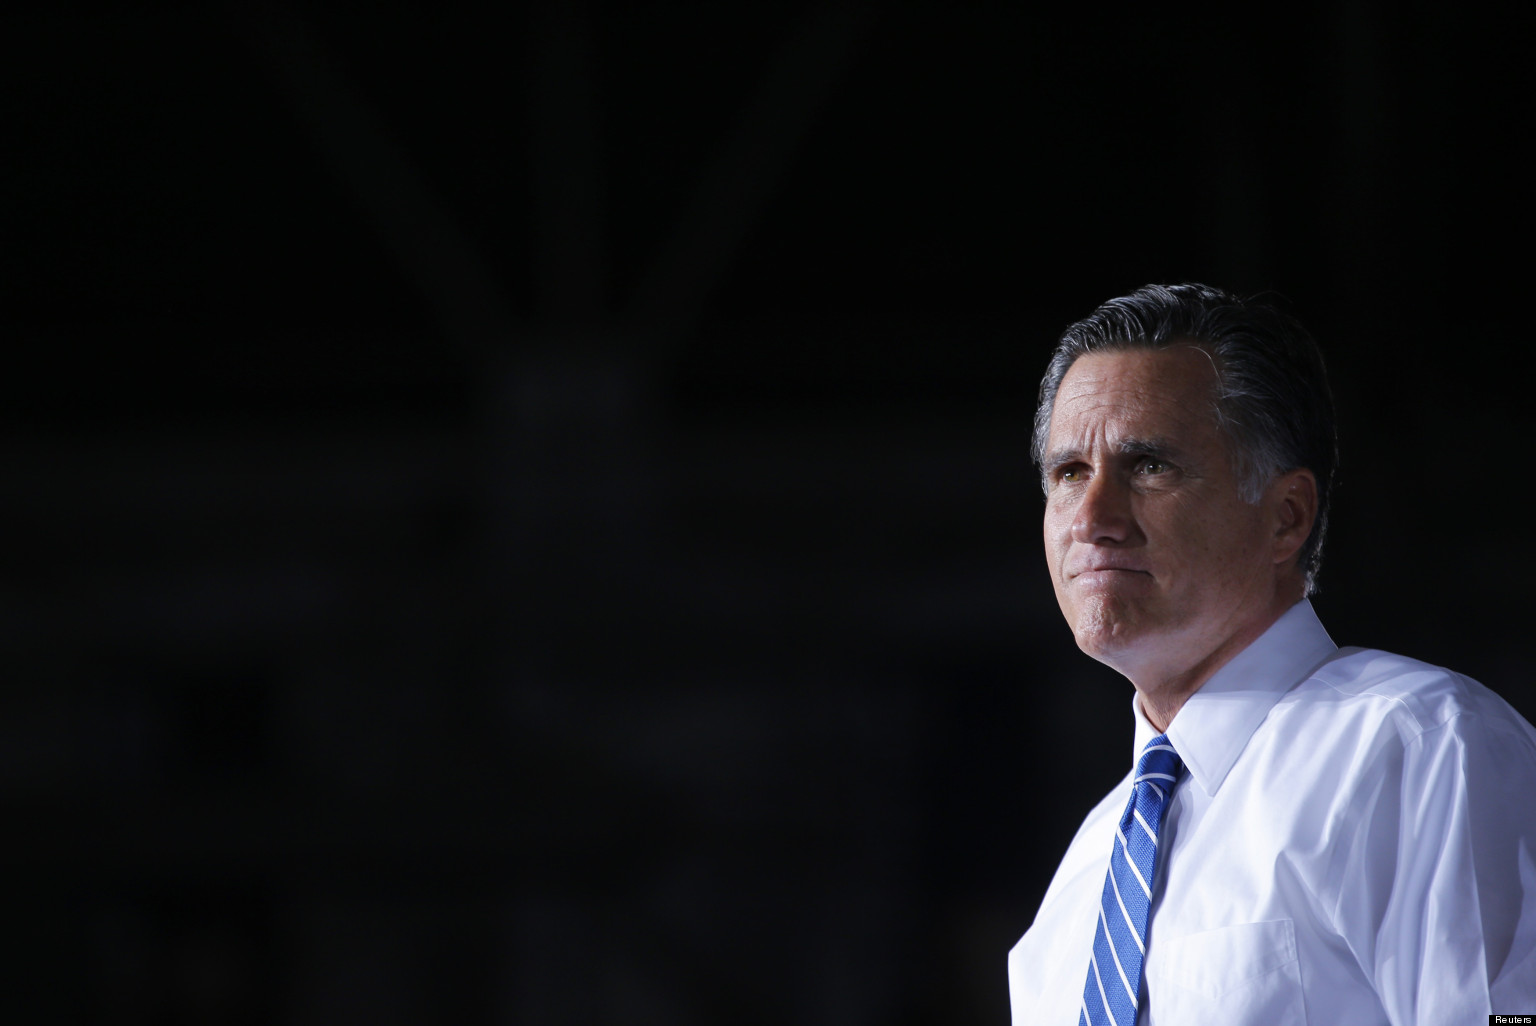 Can Mitt Romney Play Both Sides of the Moderate-Conservative Divide?